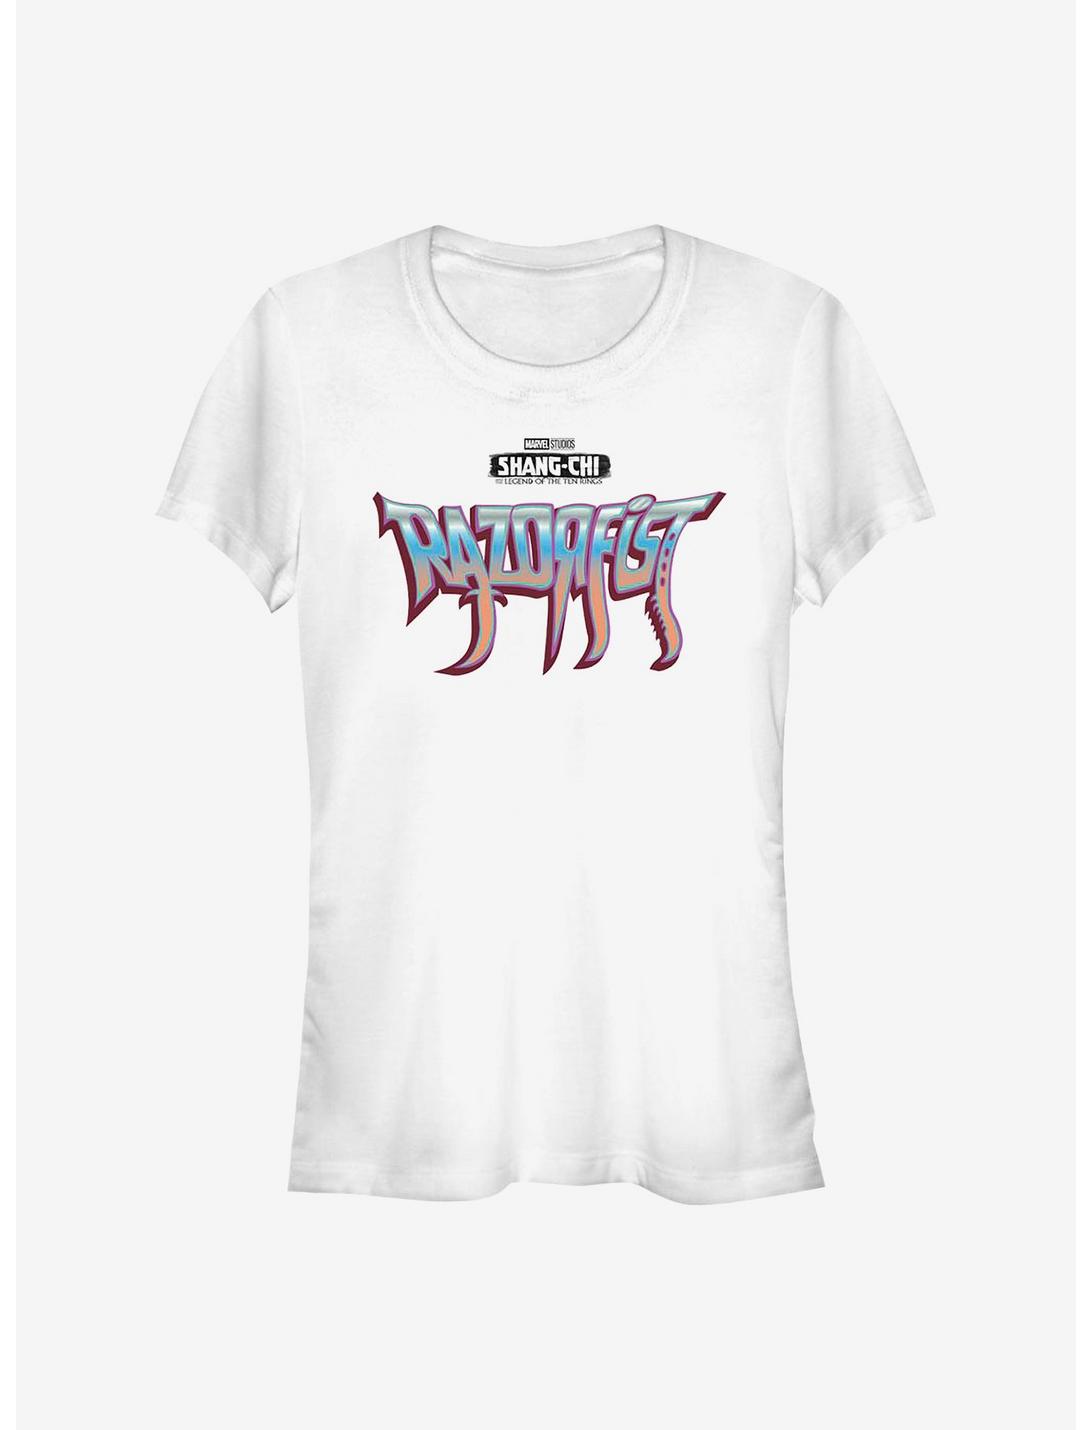 Marvel Shang-Chi And The Legend Of The Ten Rings Razorfist Logo Girls T-Shirt, WHITE, hi-res